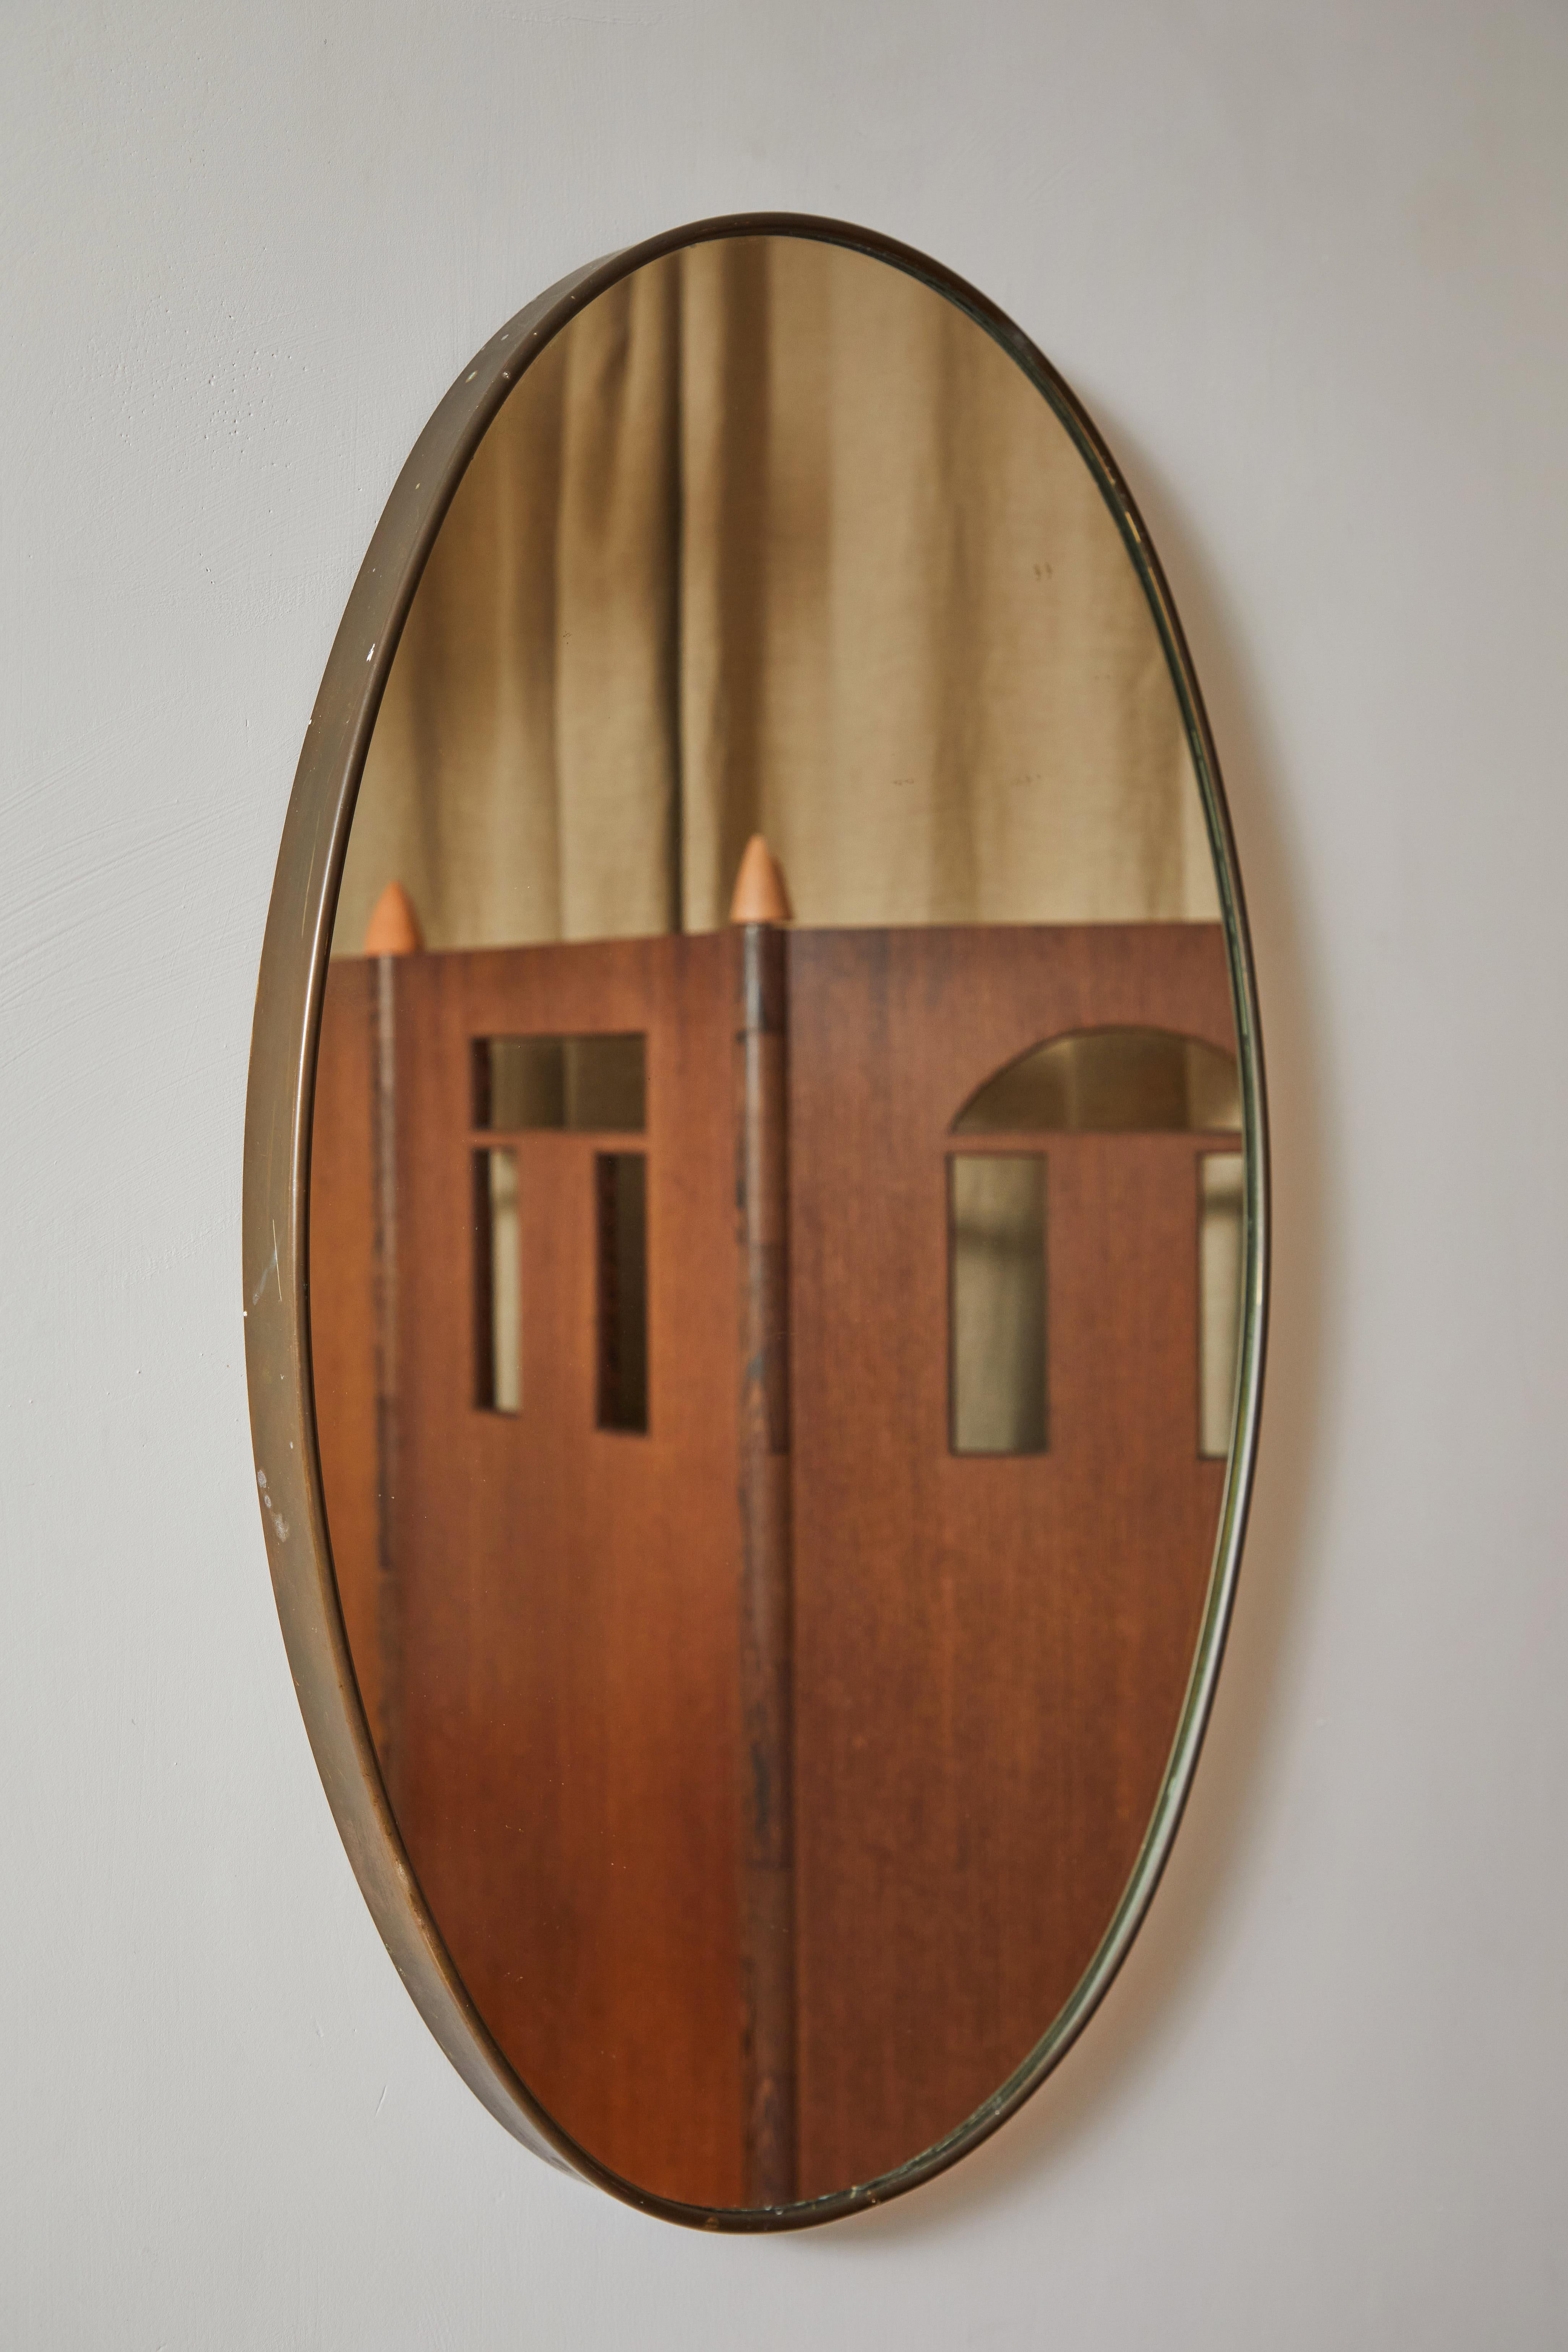 Italian patinated brass framed wall mirror. Made in Italy, circa 1960s.